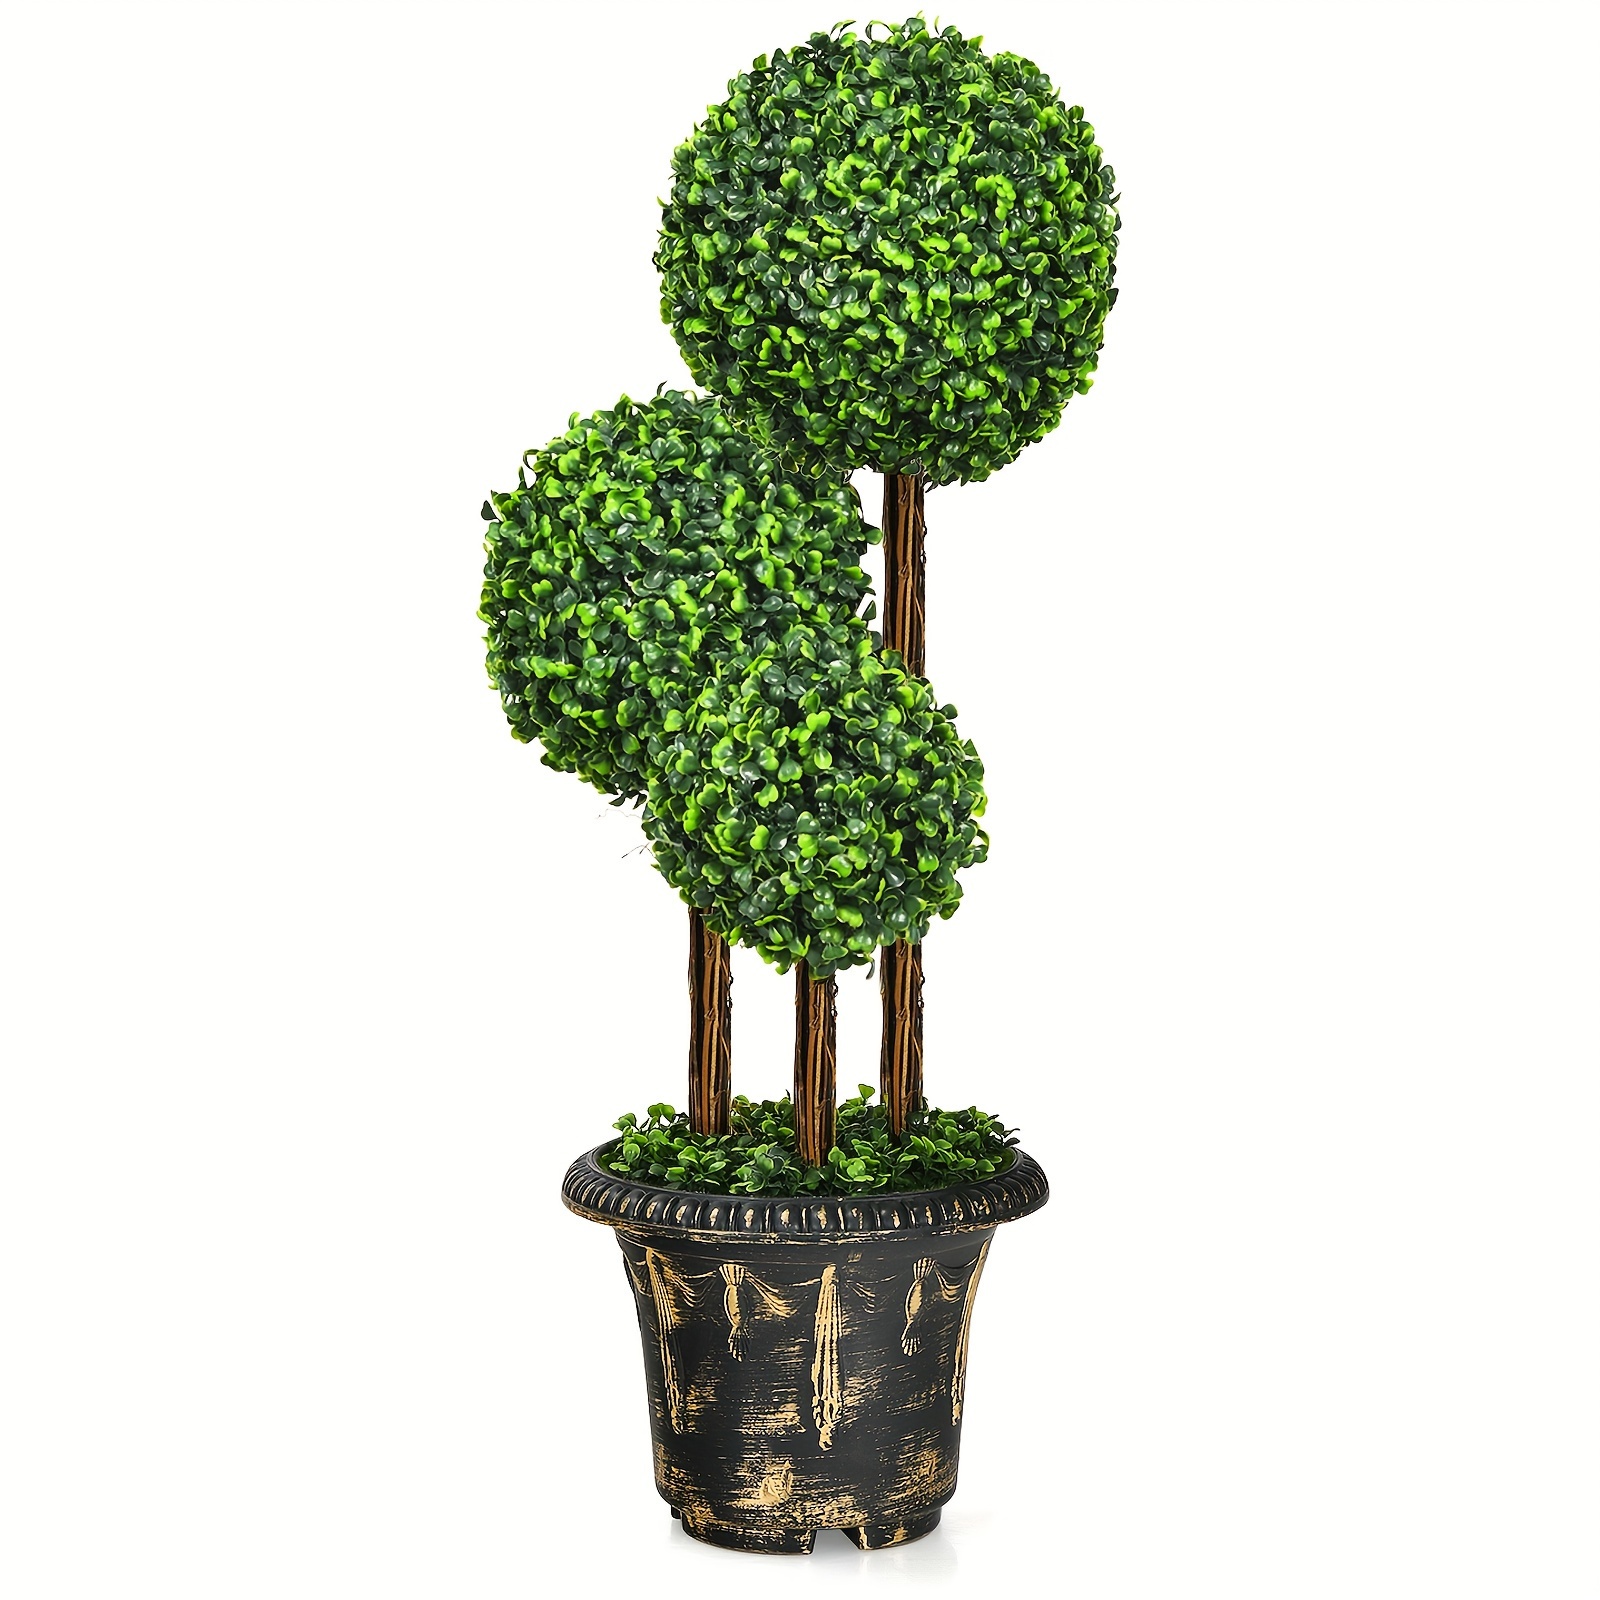 

1pc Artificial Topiary Triple Ball Tree Indoor Outdoor Decor, Uv Resistant Fake Plant For Summer Home Decor, Aesthetic Room Decor